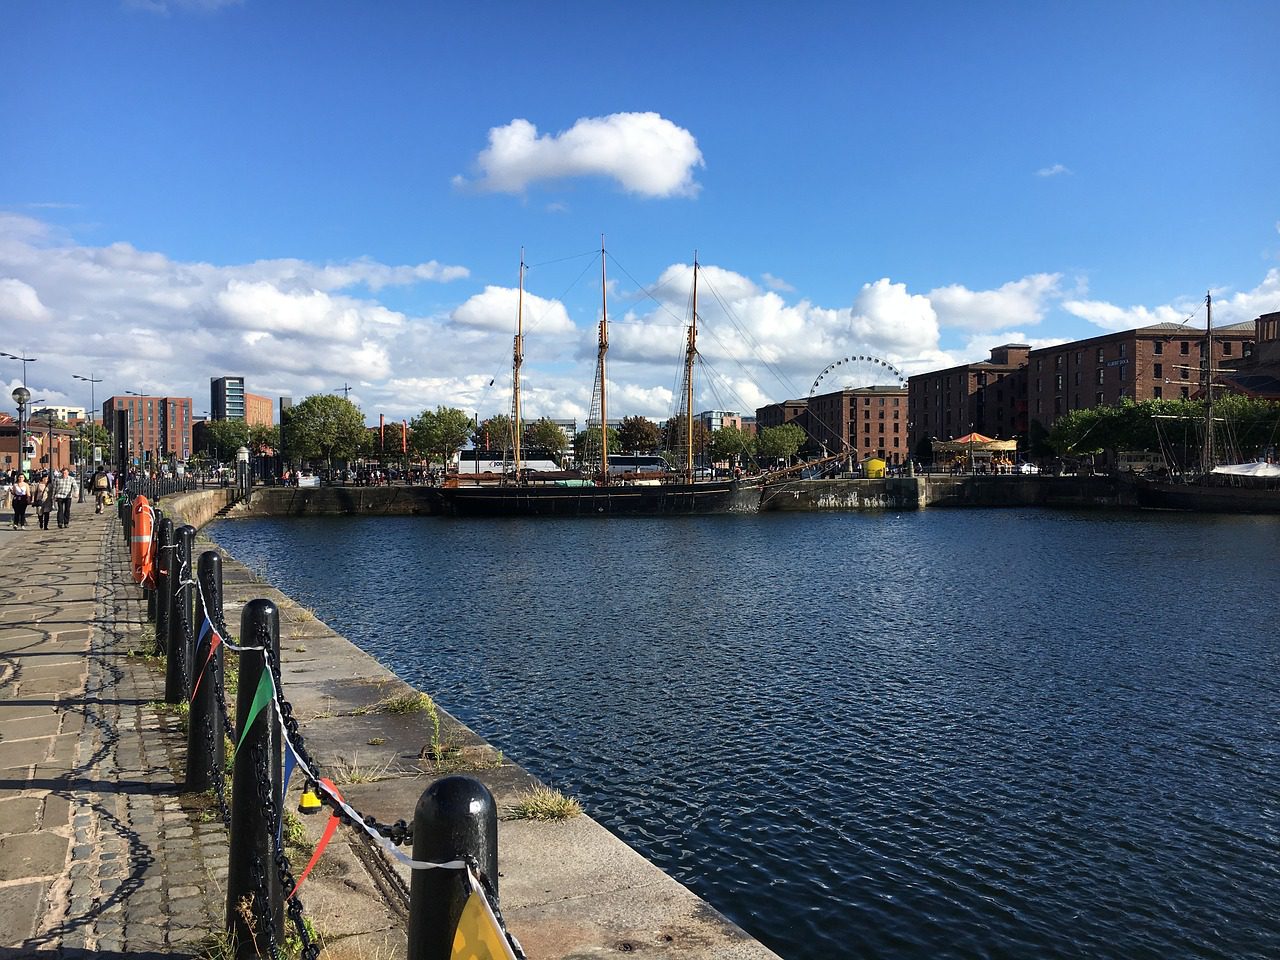 A view of the waterfront in Liverpool